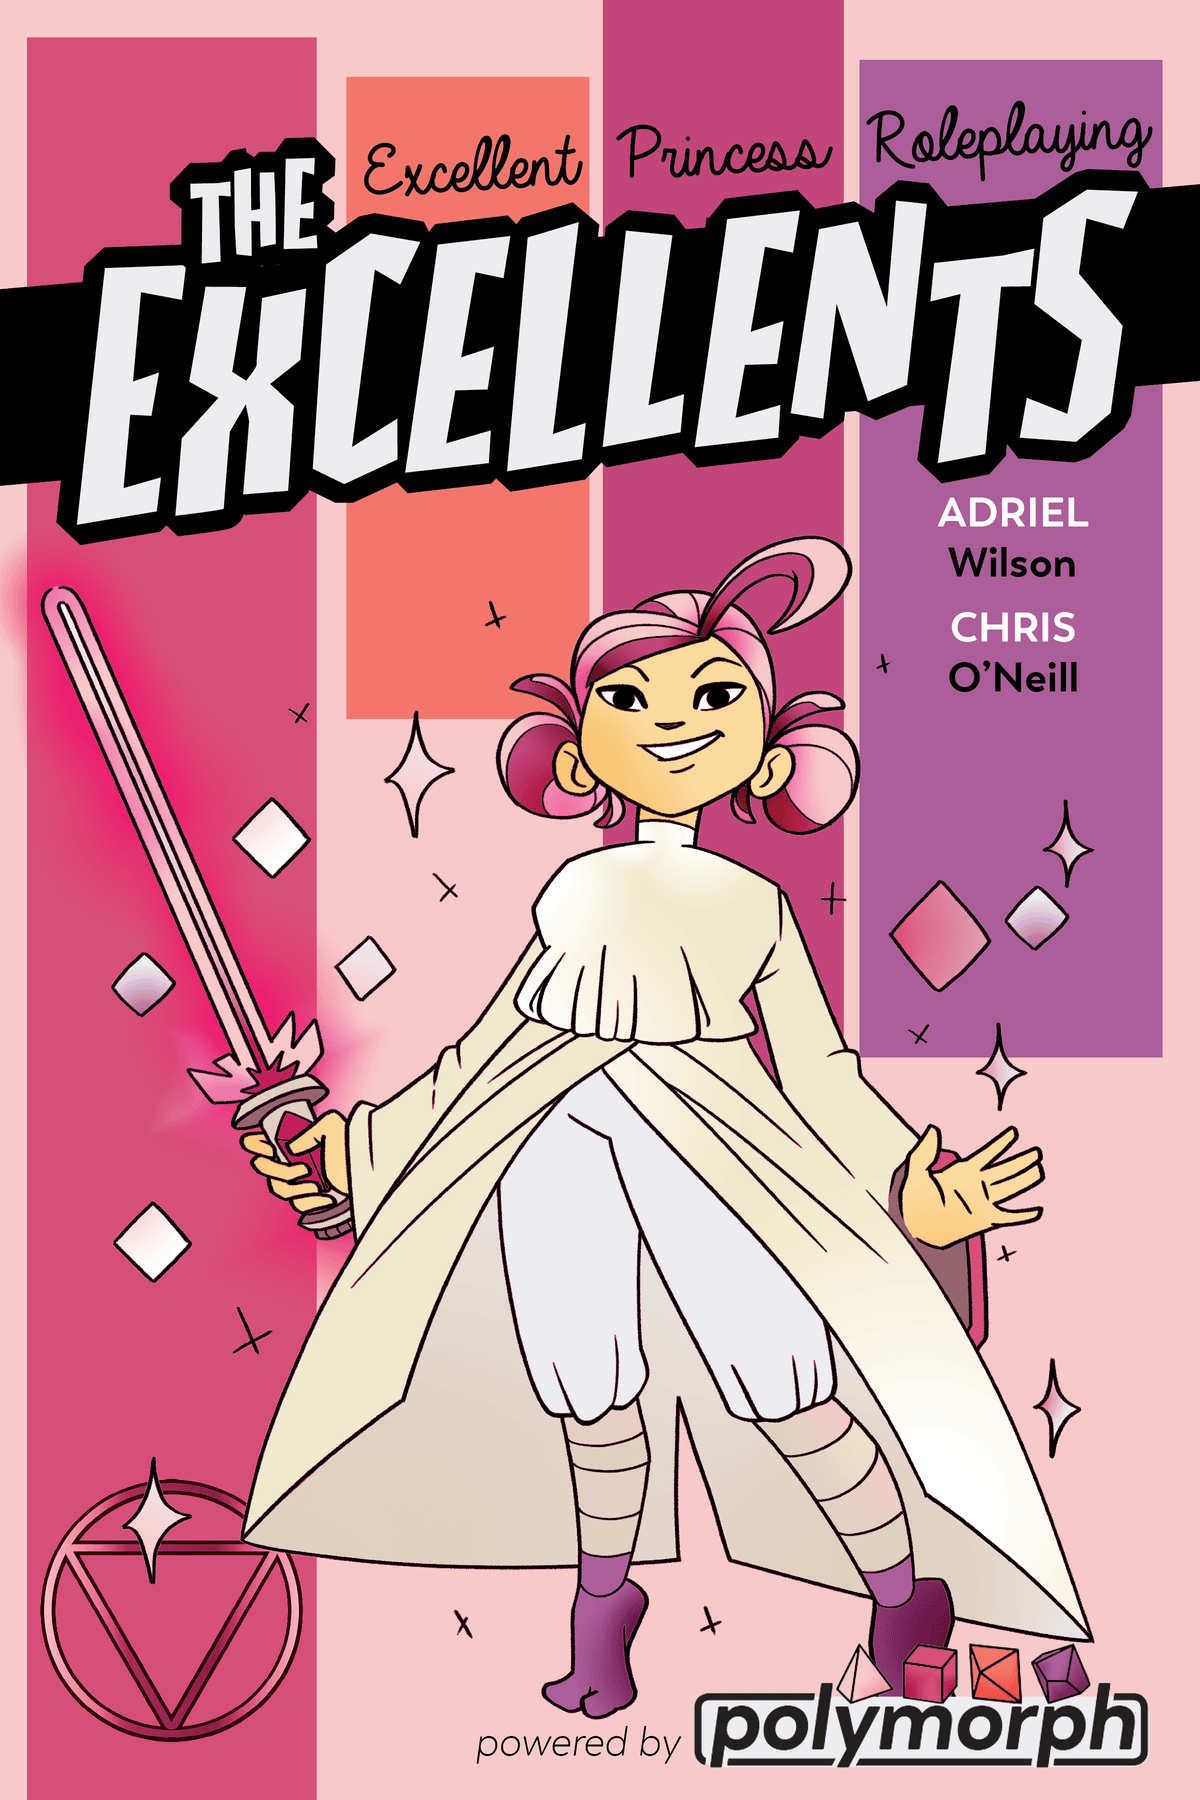 The Excellents Princess Roleplaying Game - Oddball Games